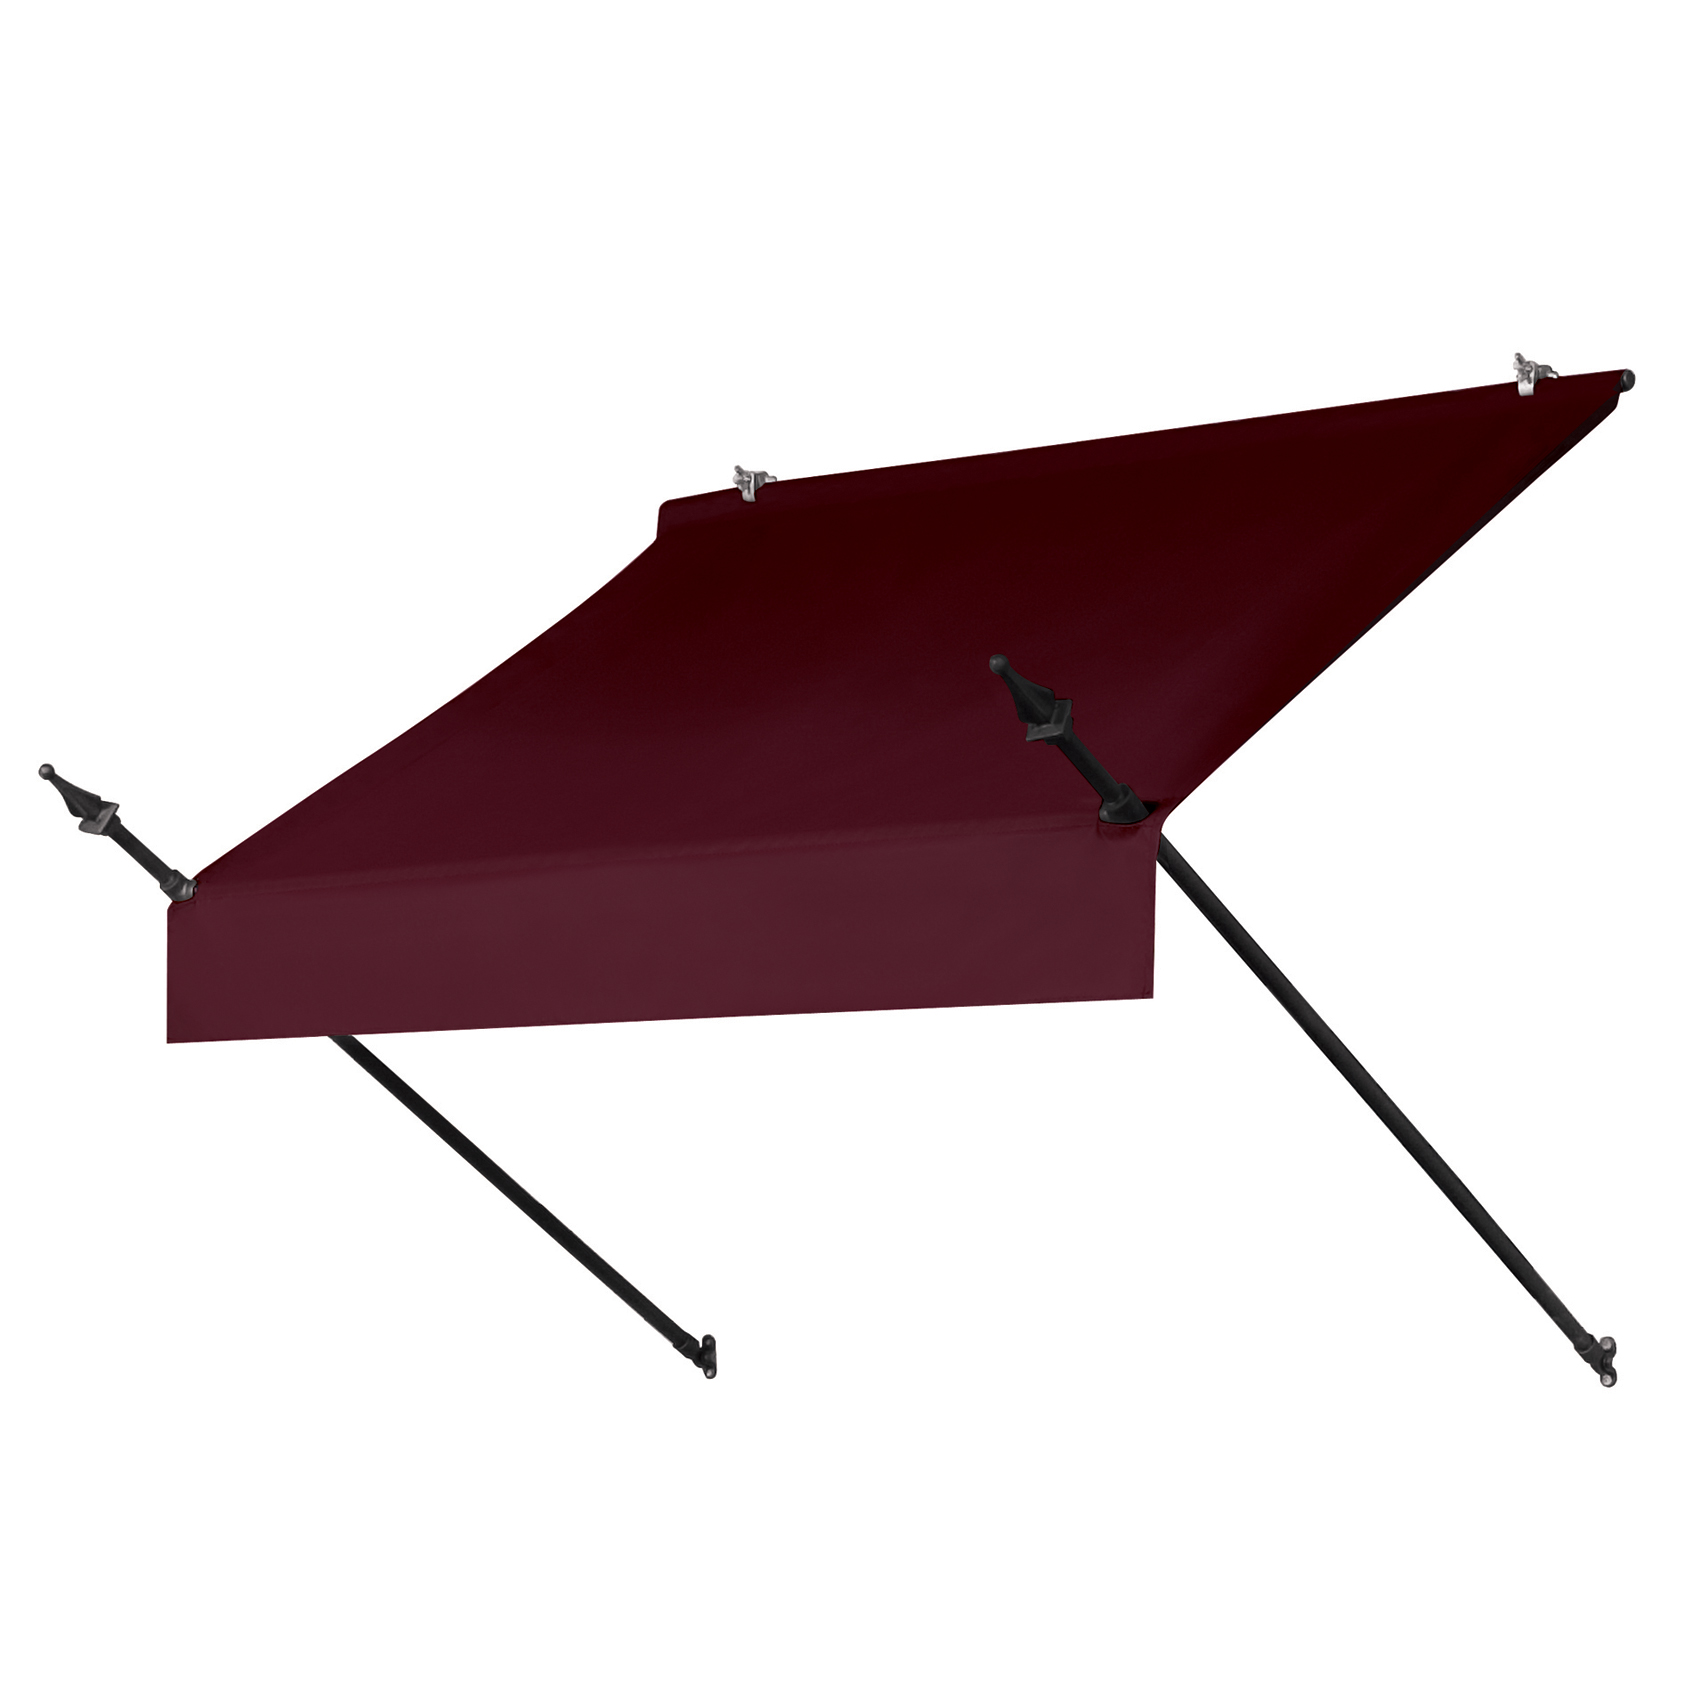 UPC 799870462871 product image for Awnings in a Box® 4' Designer Style Awning in Assorted Colors | upcitemdb.com